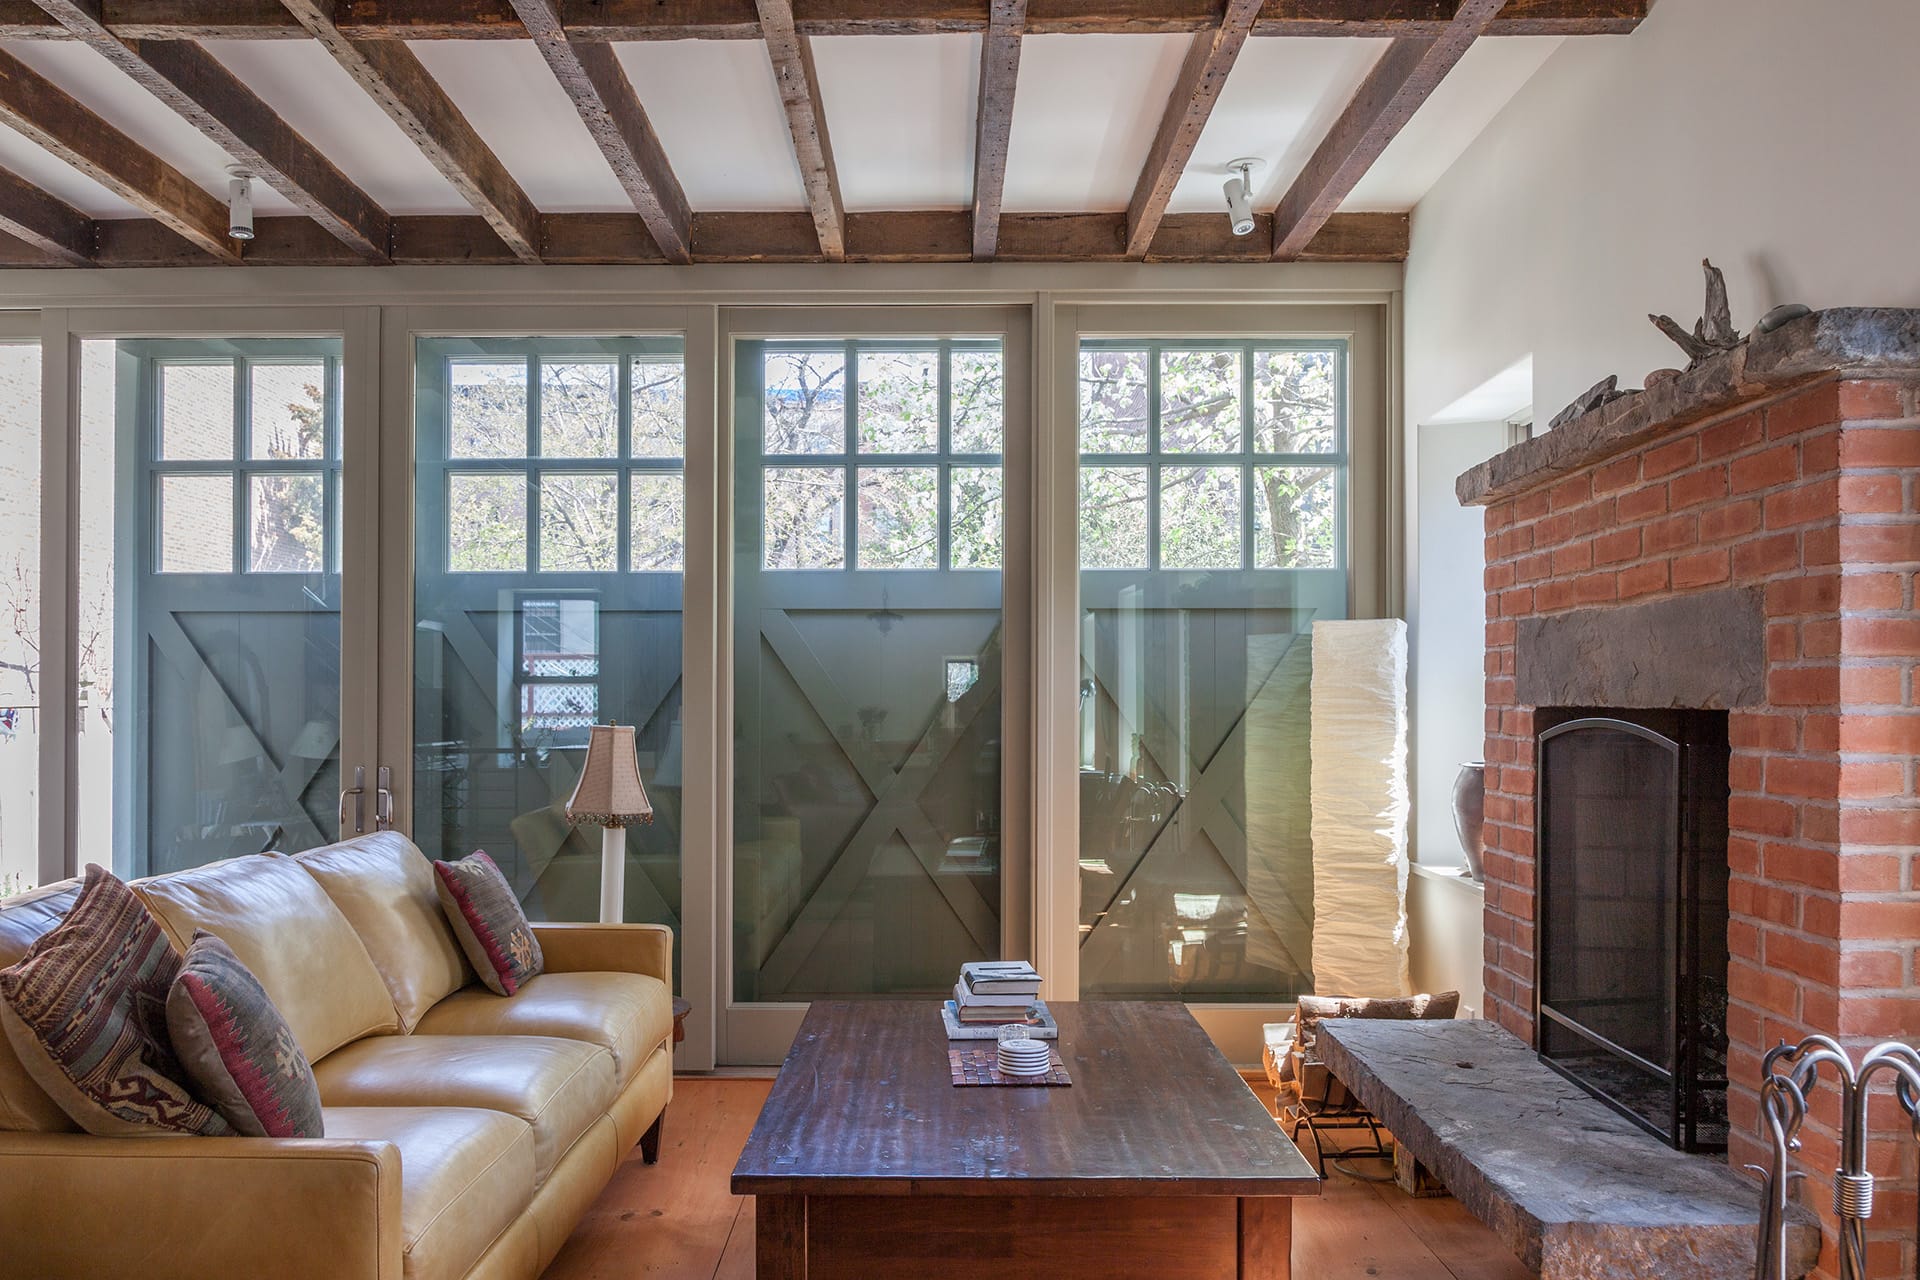 Living space in a carriage house with a wall of glass doors covered by sliding barn doors, exposed beams, original fireplace, and yellow leather couch.